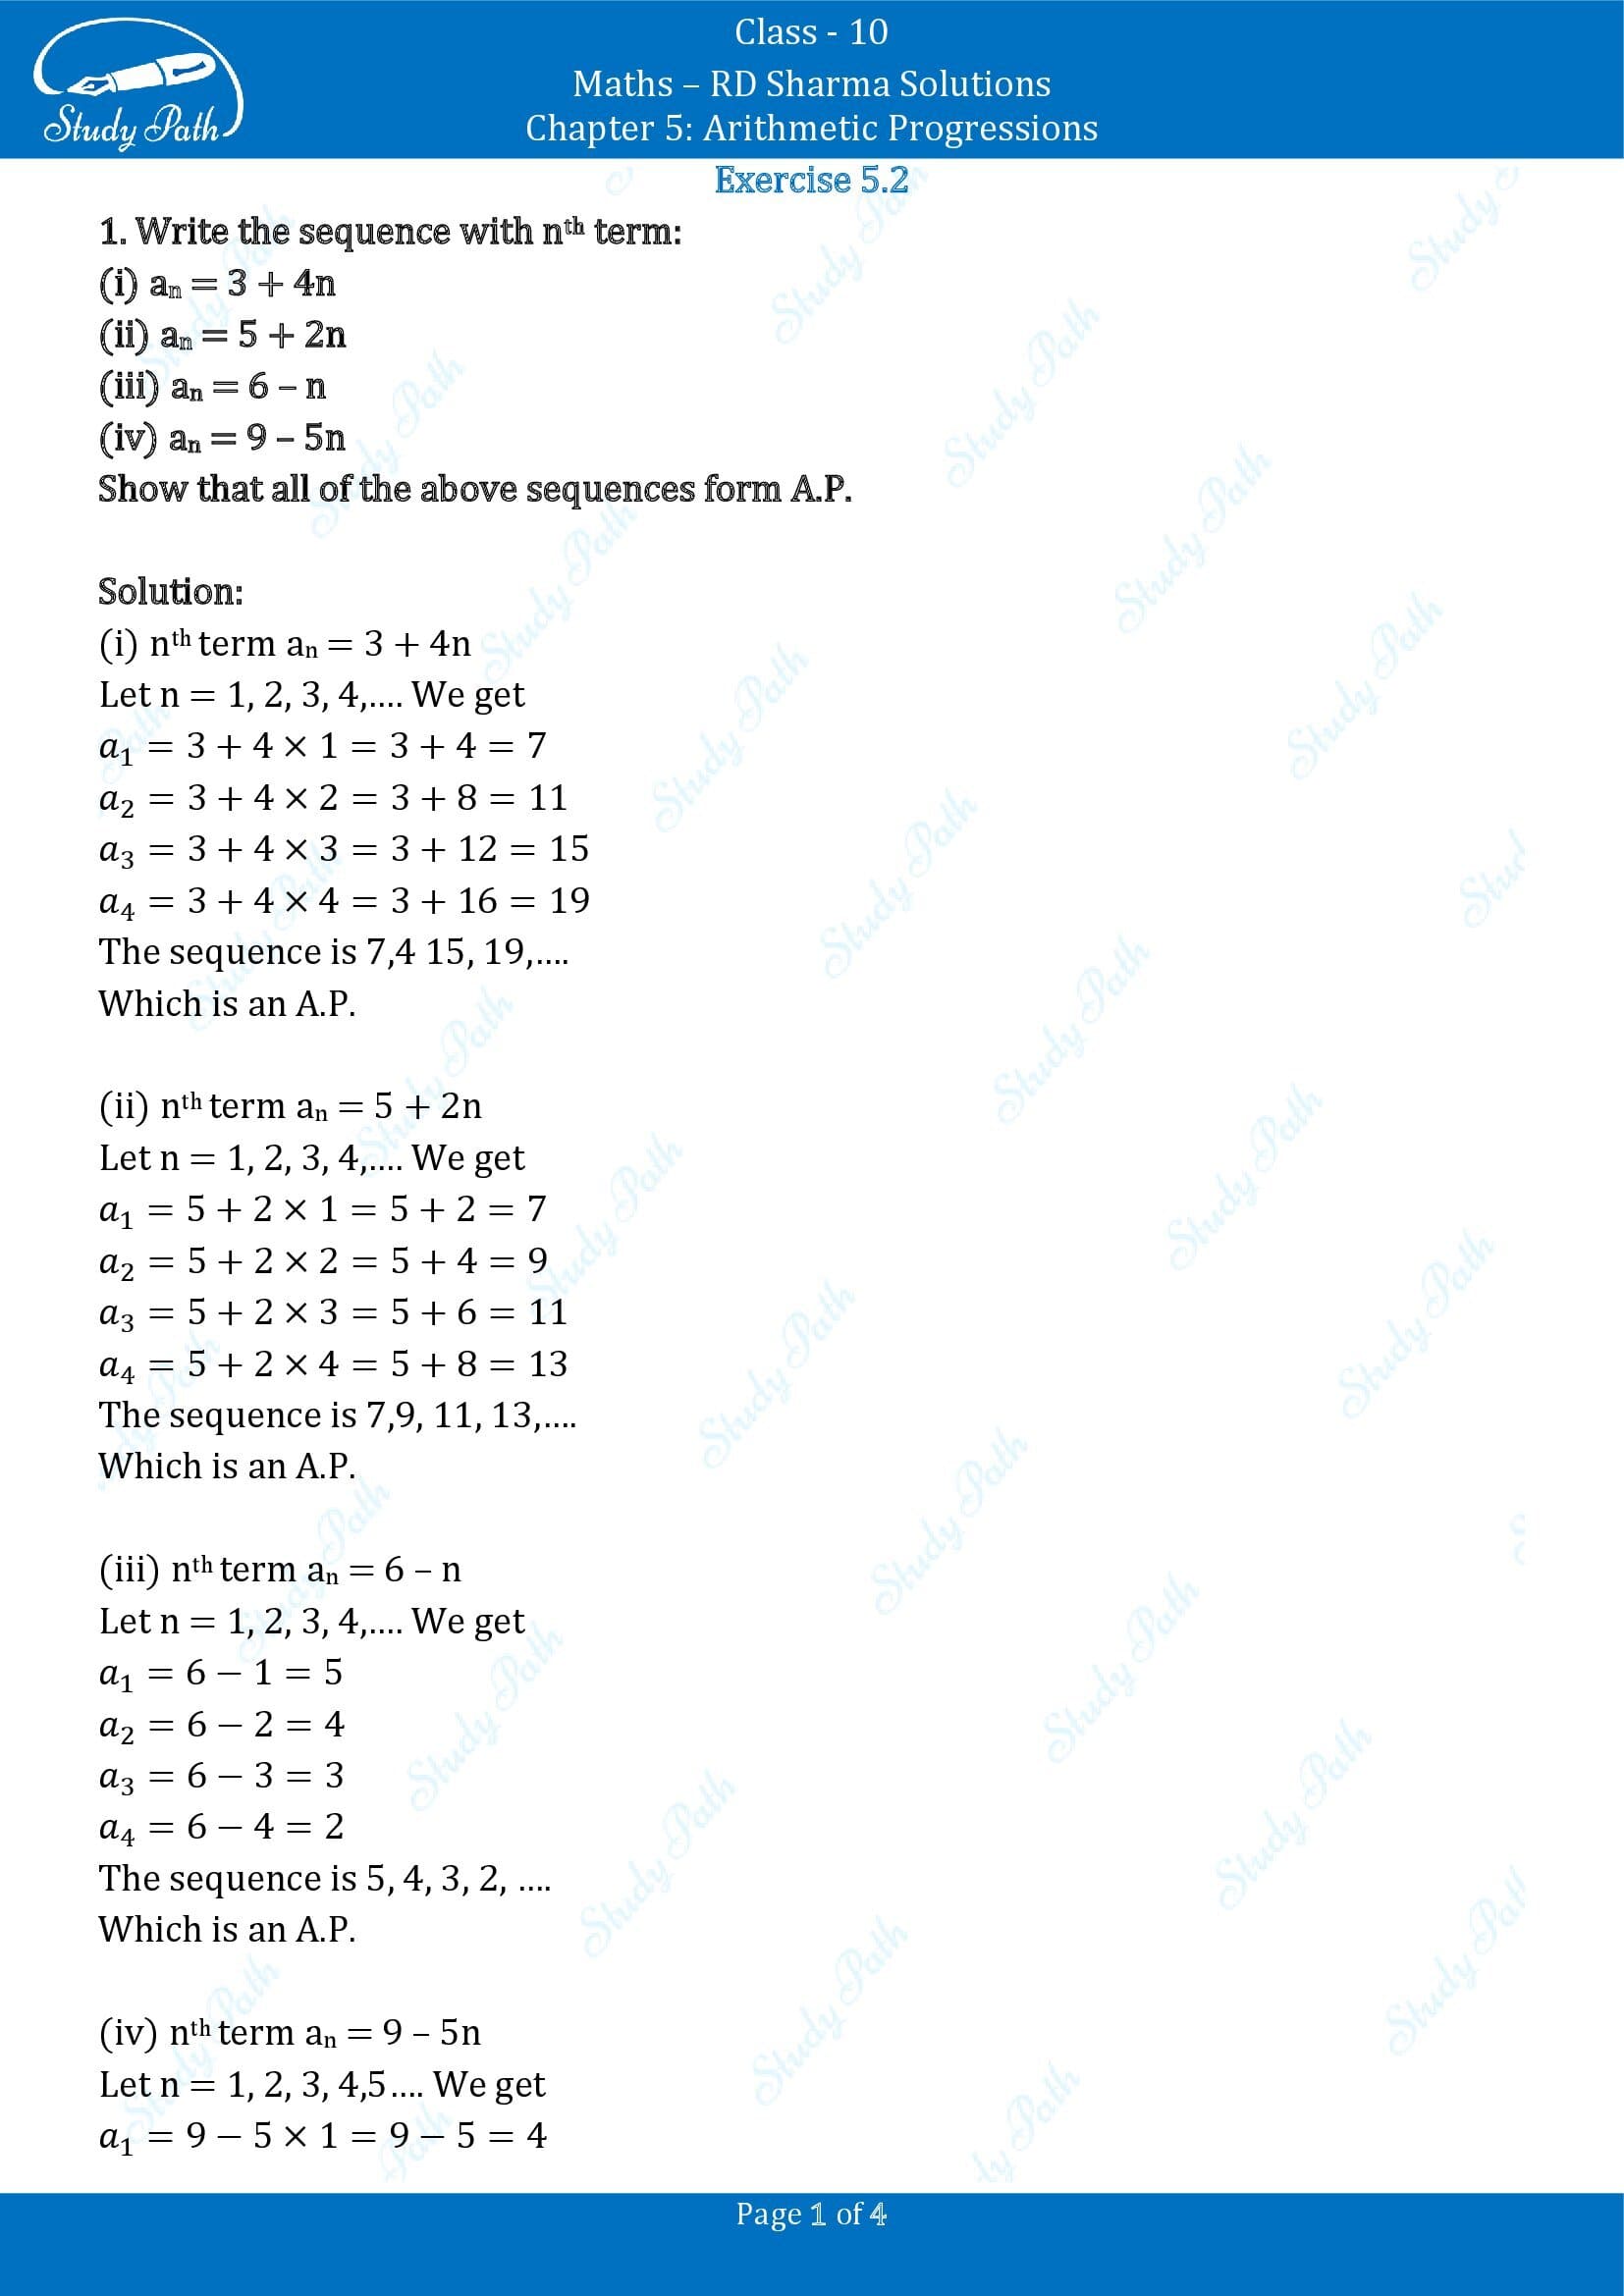 RD Sharma Solutions Class 10 Chapter 5 Arithmetic Progressions Exercise 5.2 00001